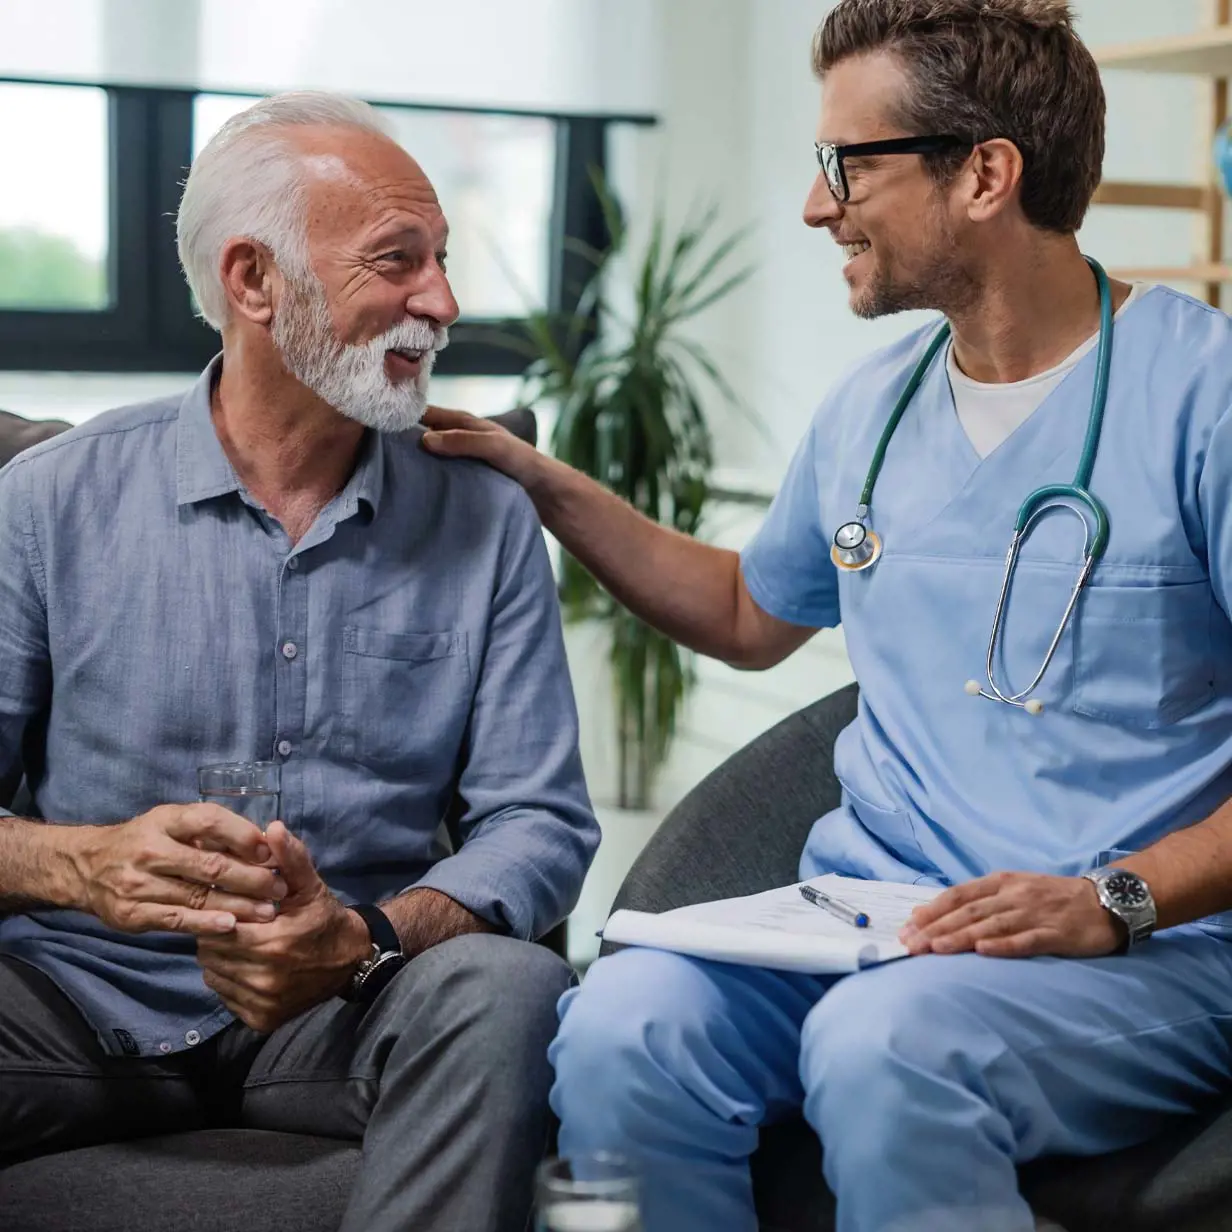 Male doctor talking with older male patient with his hand on his shoulder smiling.